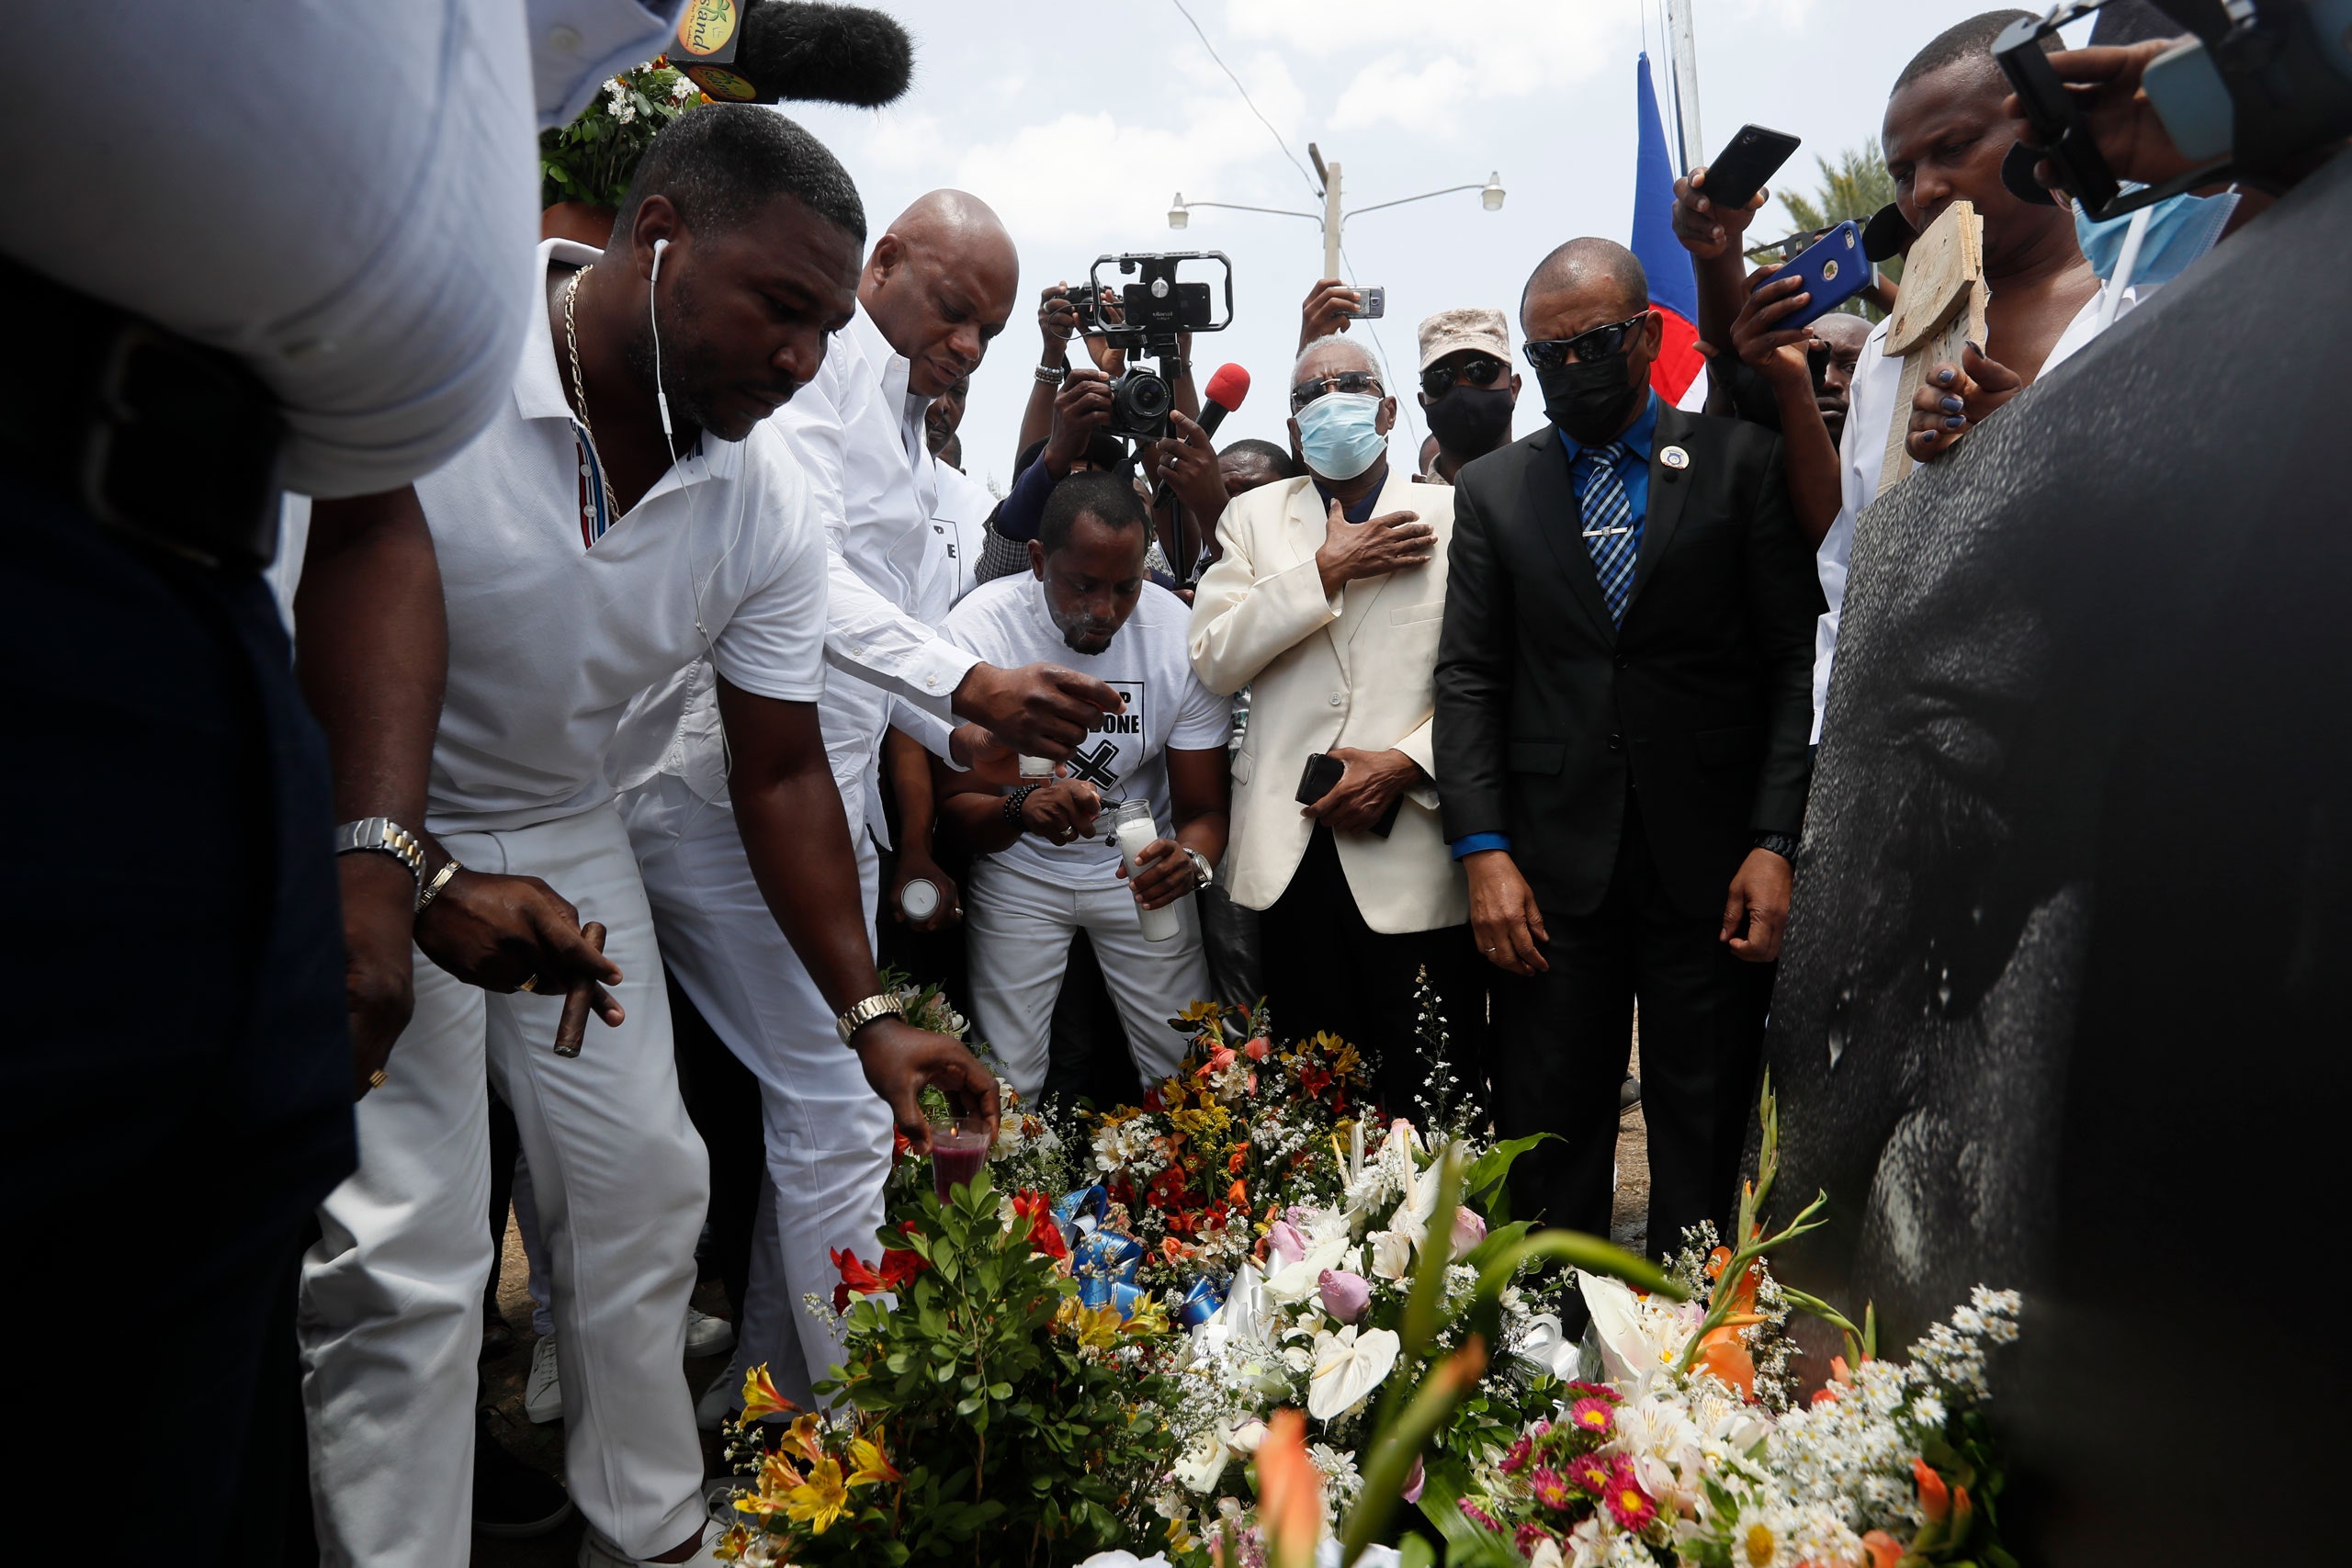 On 7th July 2021 - Haitian President Jovenel Moïse is shot to death